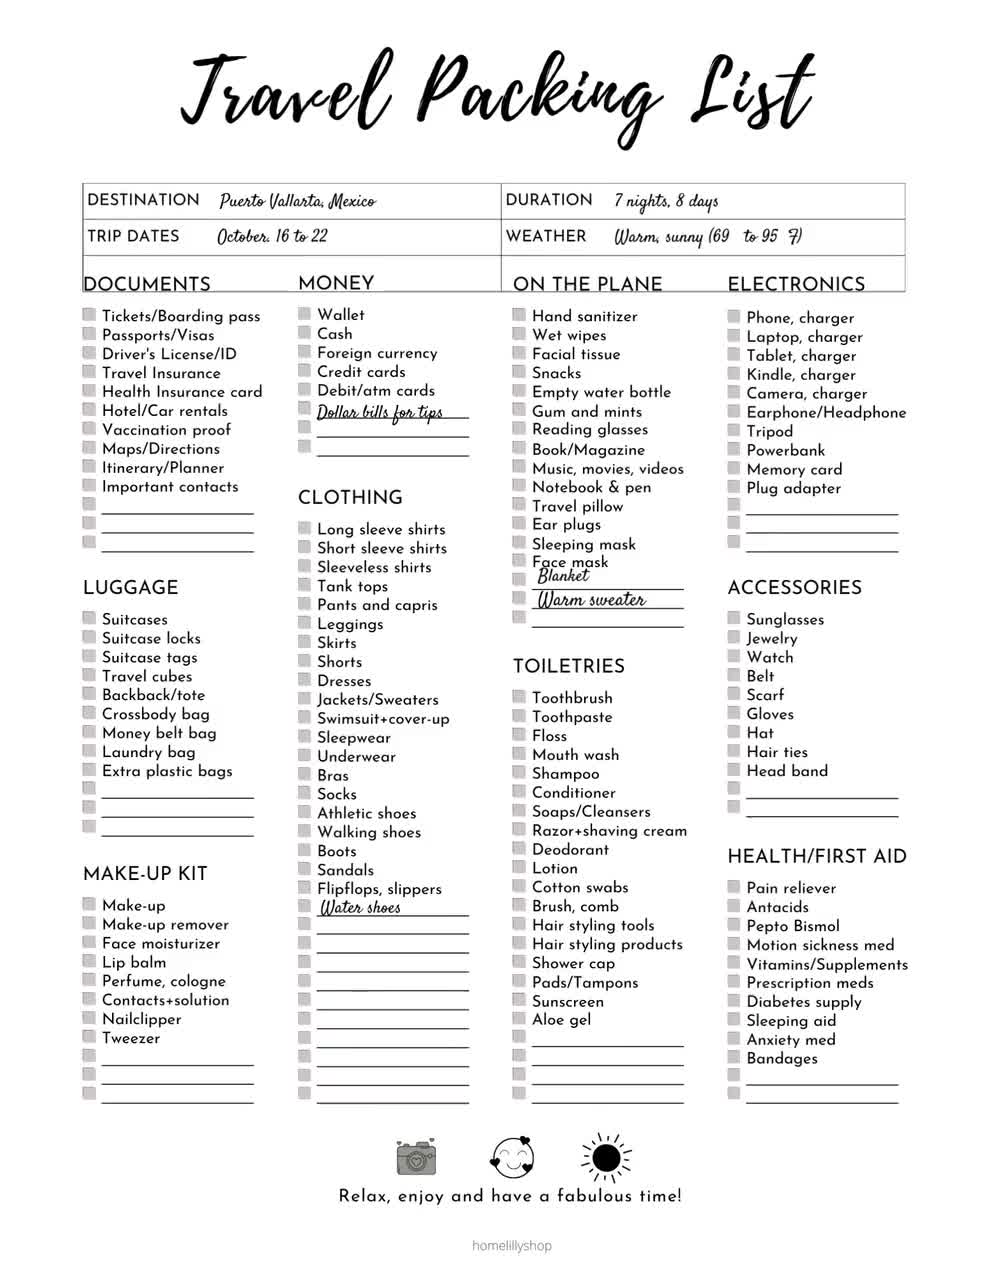 Travel Packing List Packing Checklist Travel Planner Packing List Printable Travel  Checklist Cruise Packing List 